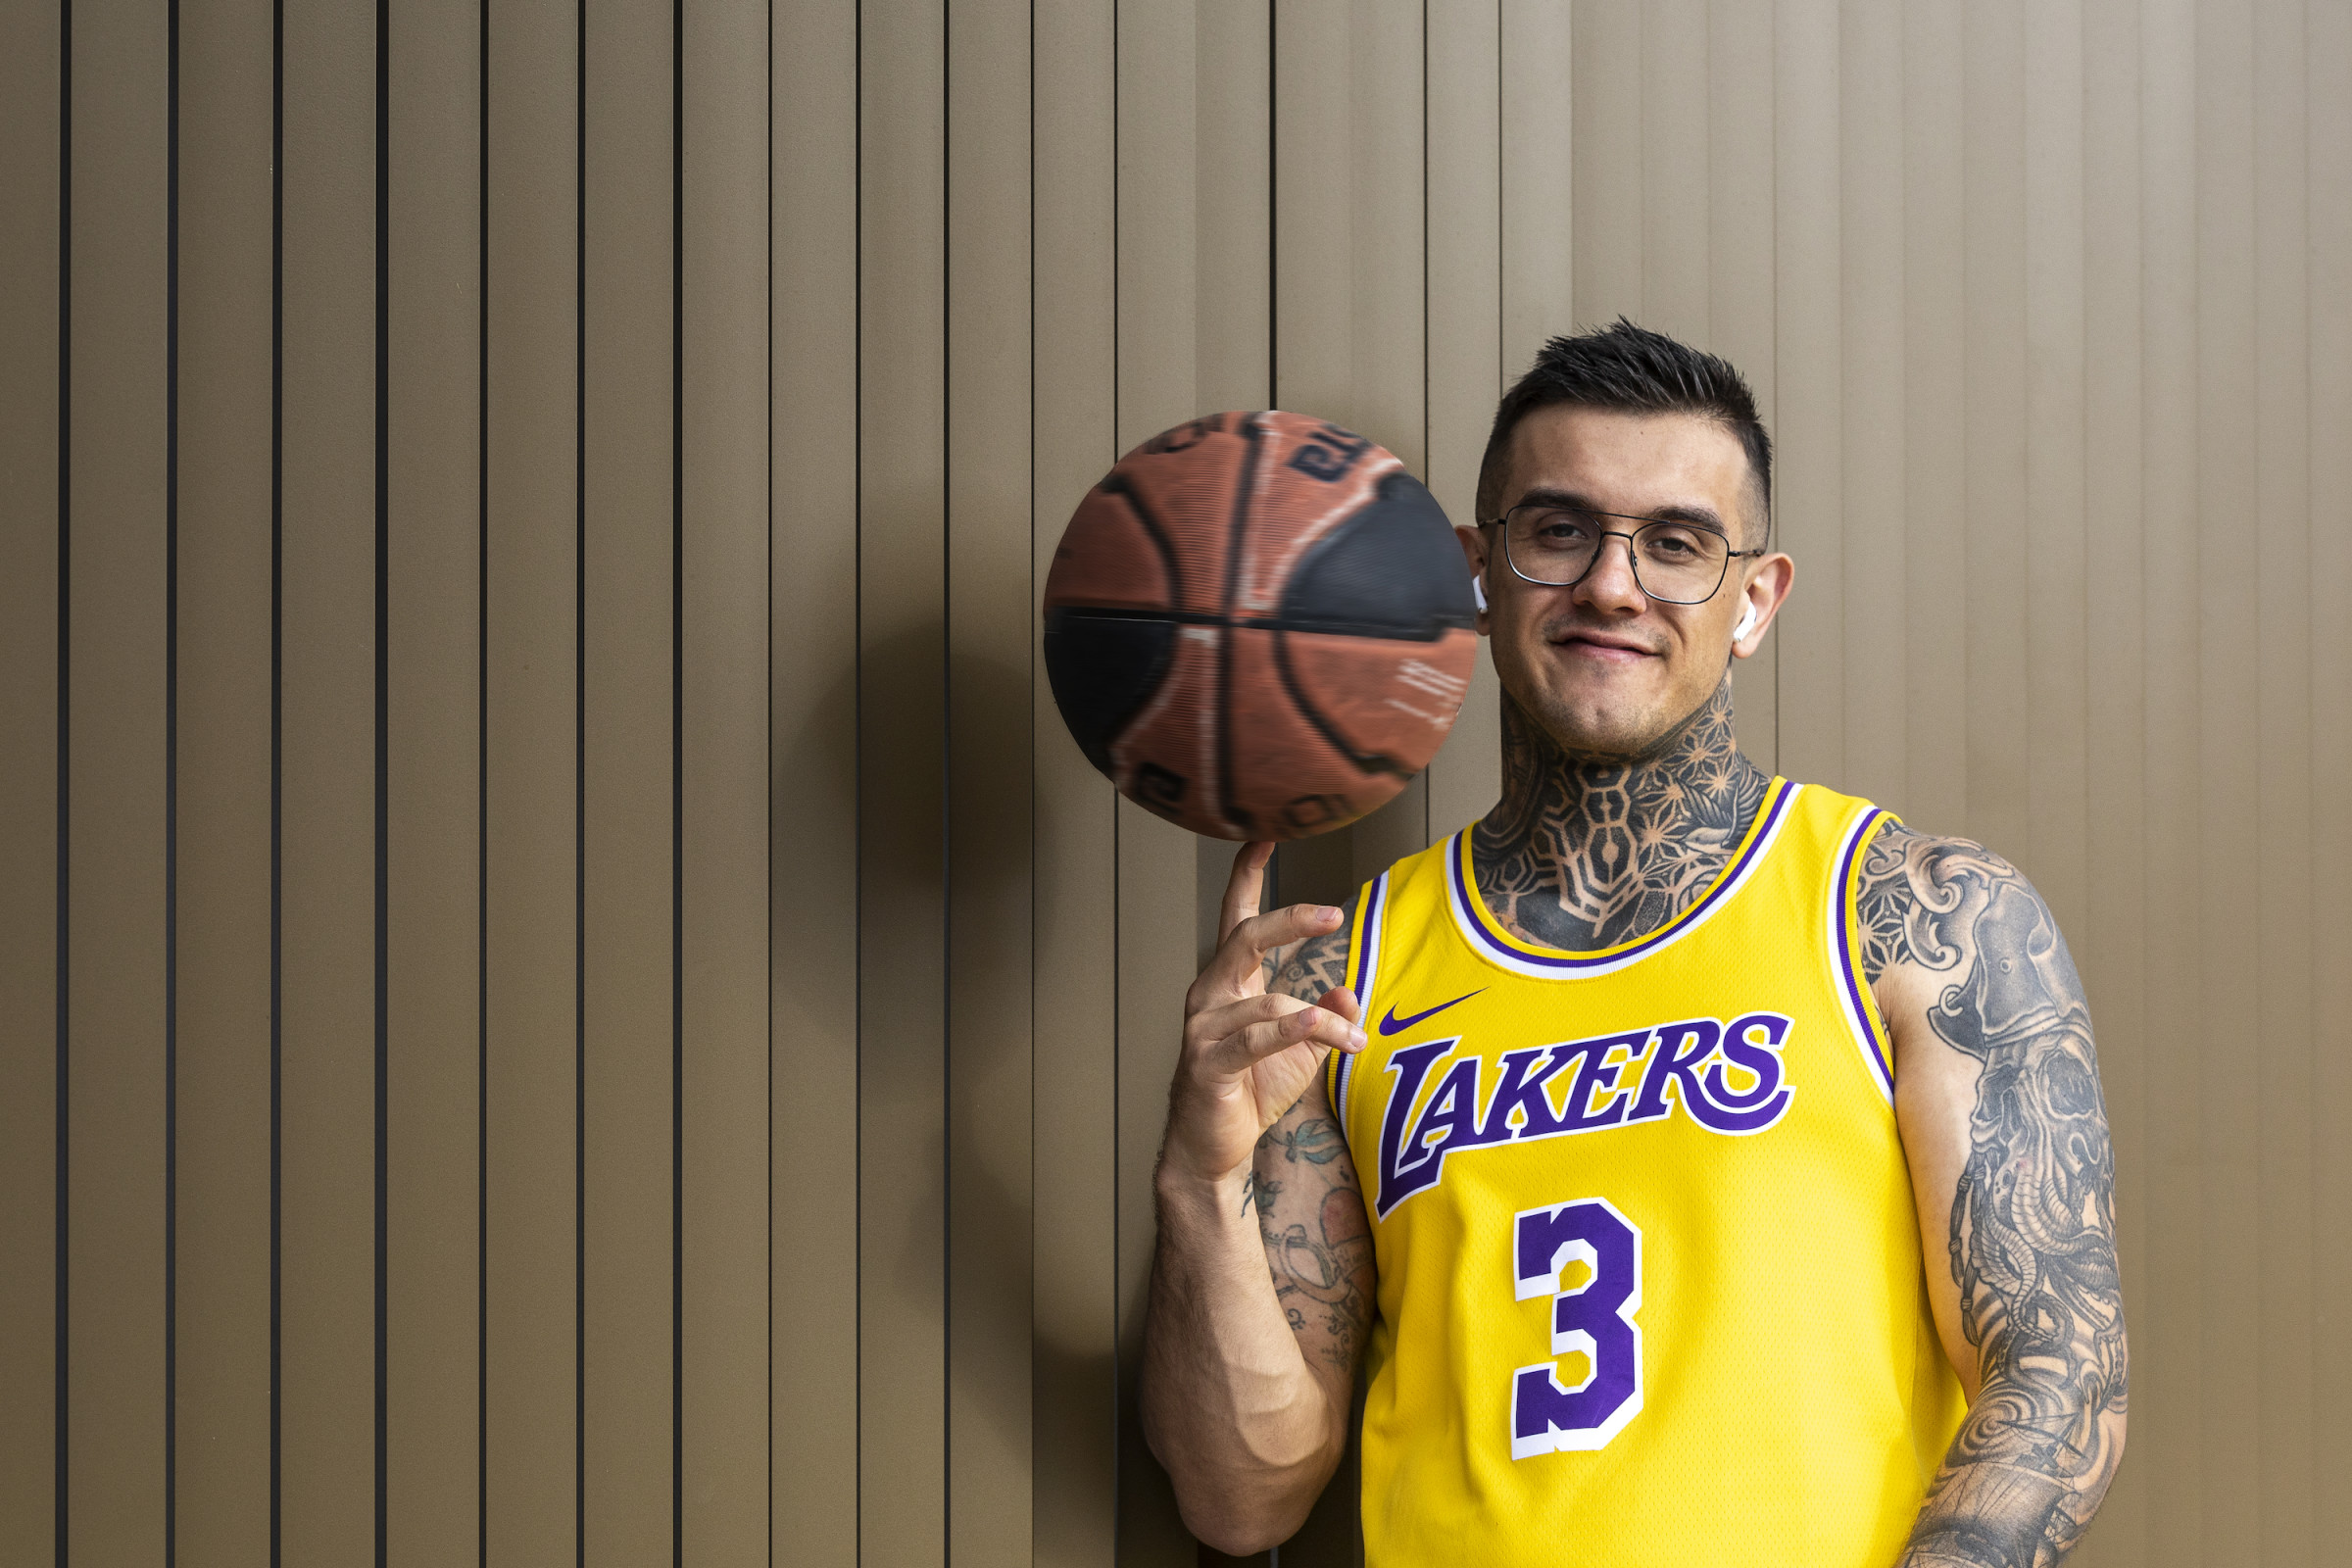 Author Pedro wearing an L.A. Lakers jersey and spinning a basketball